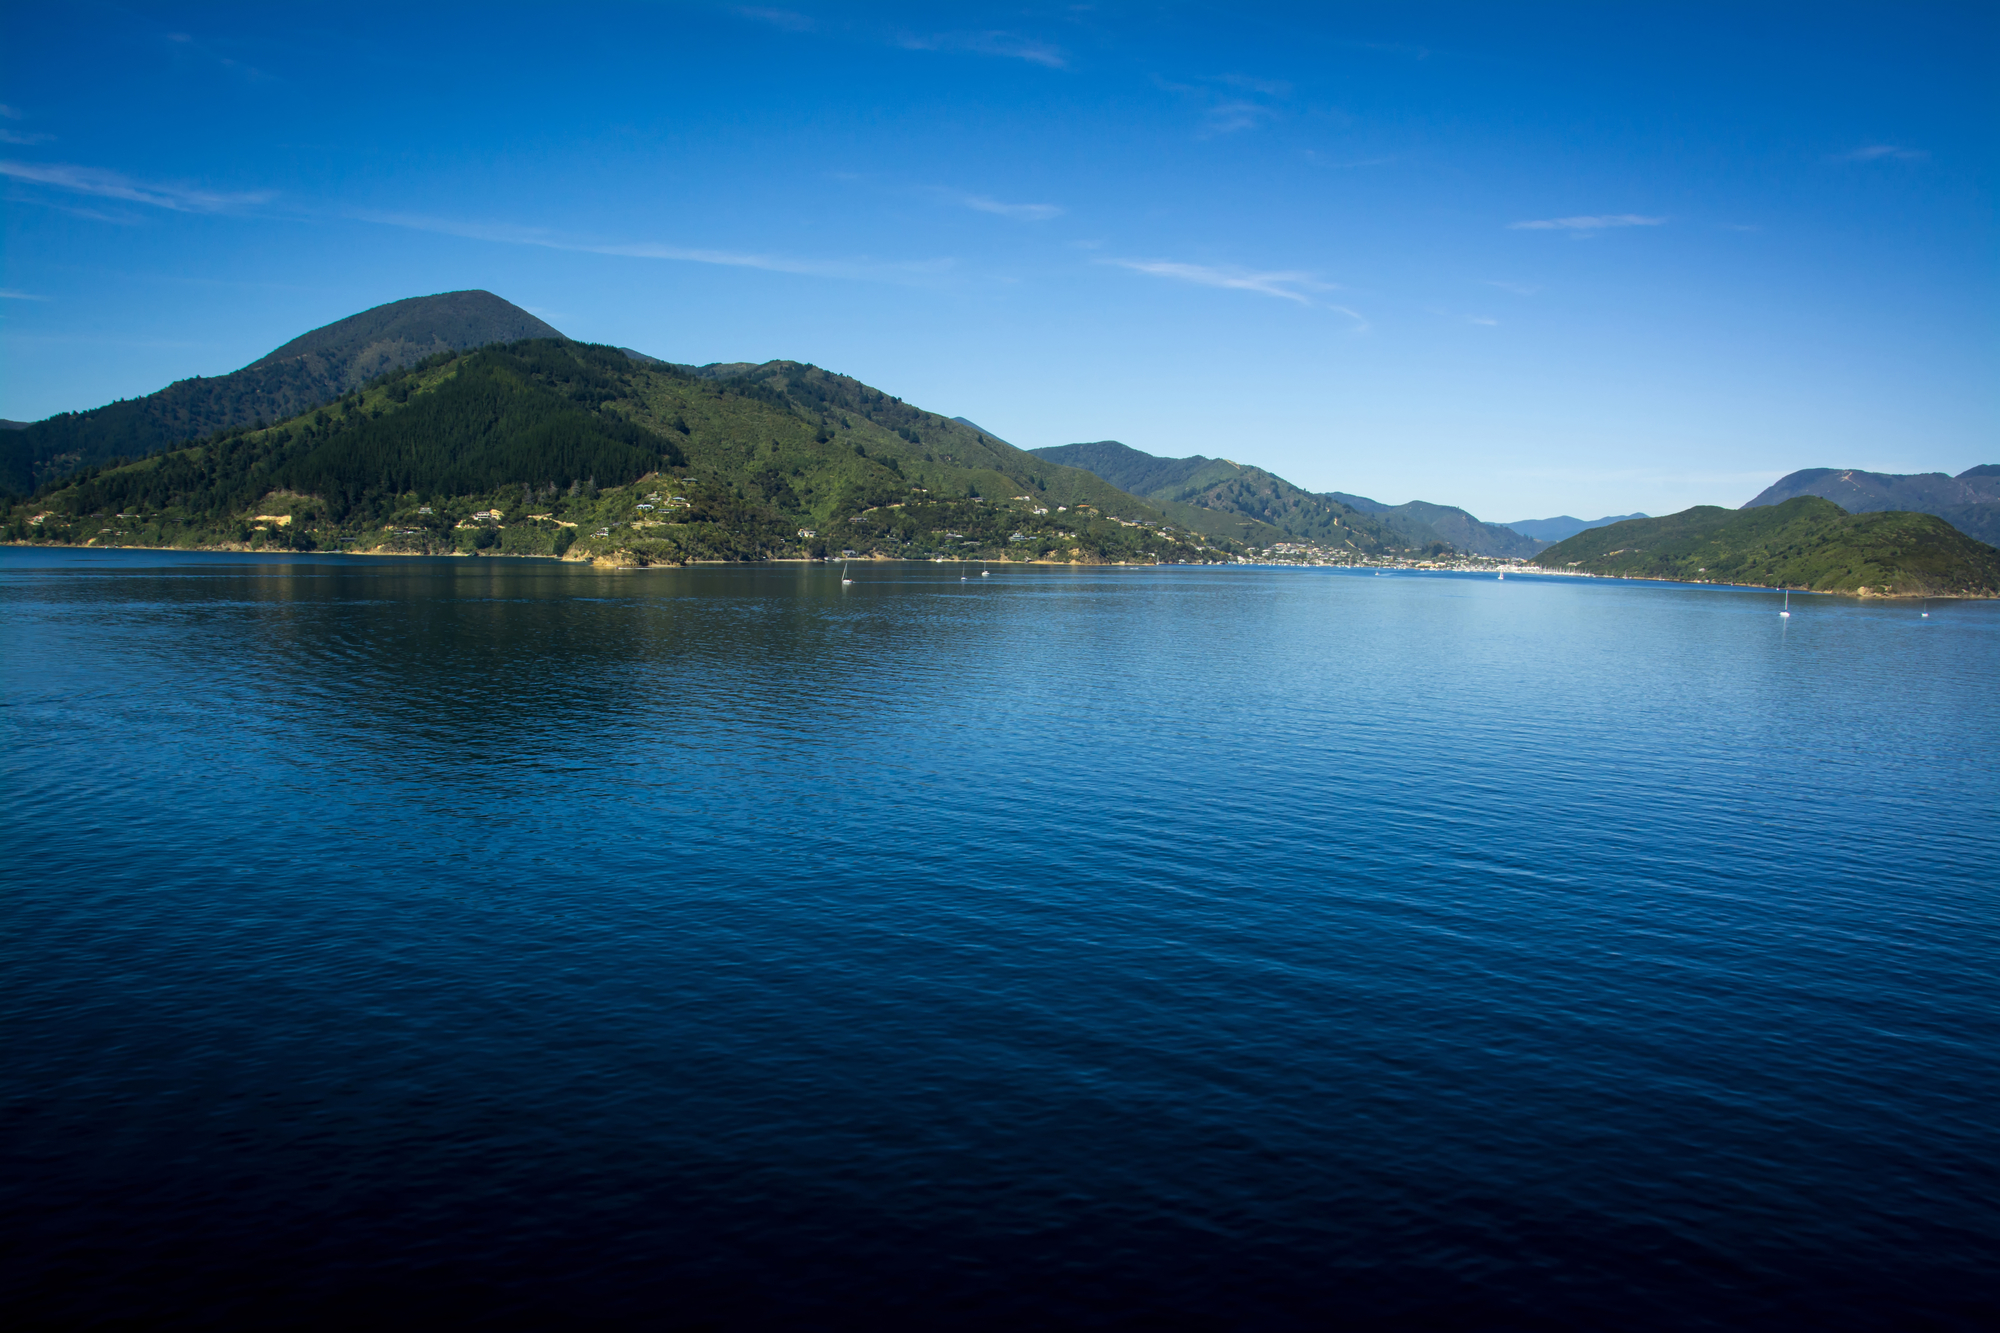 Marlborough Sounds seen from ferry from Wellington to Picton, Ne